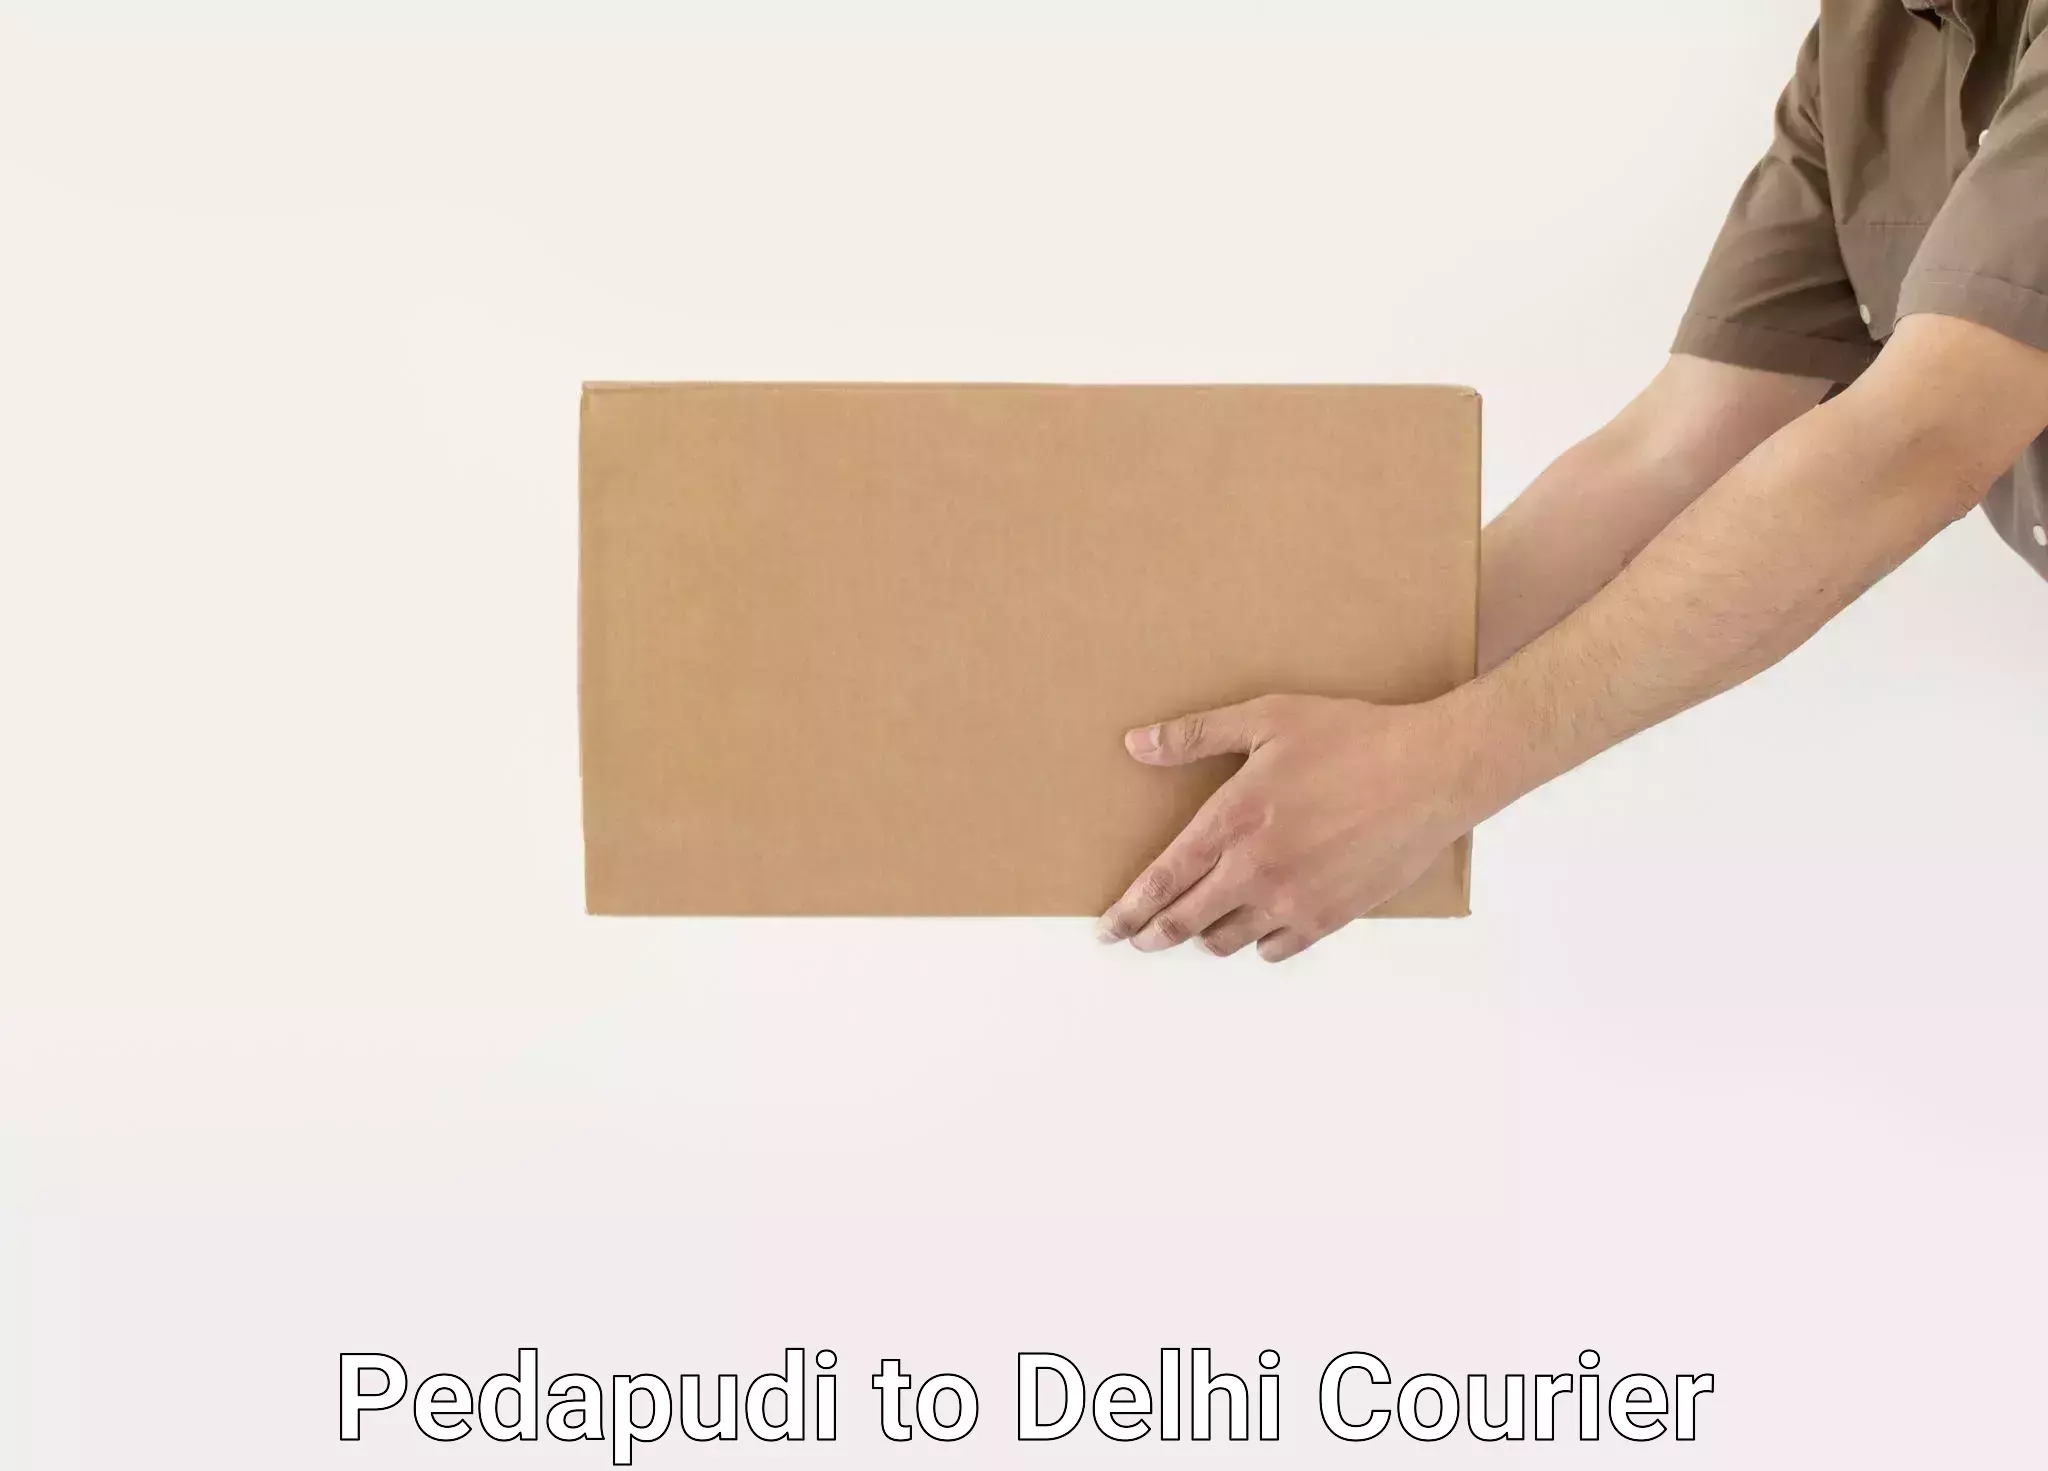 Quality moving and storage Pedapudi to Delhi